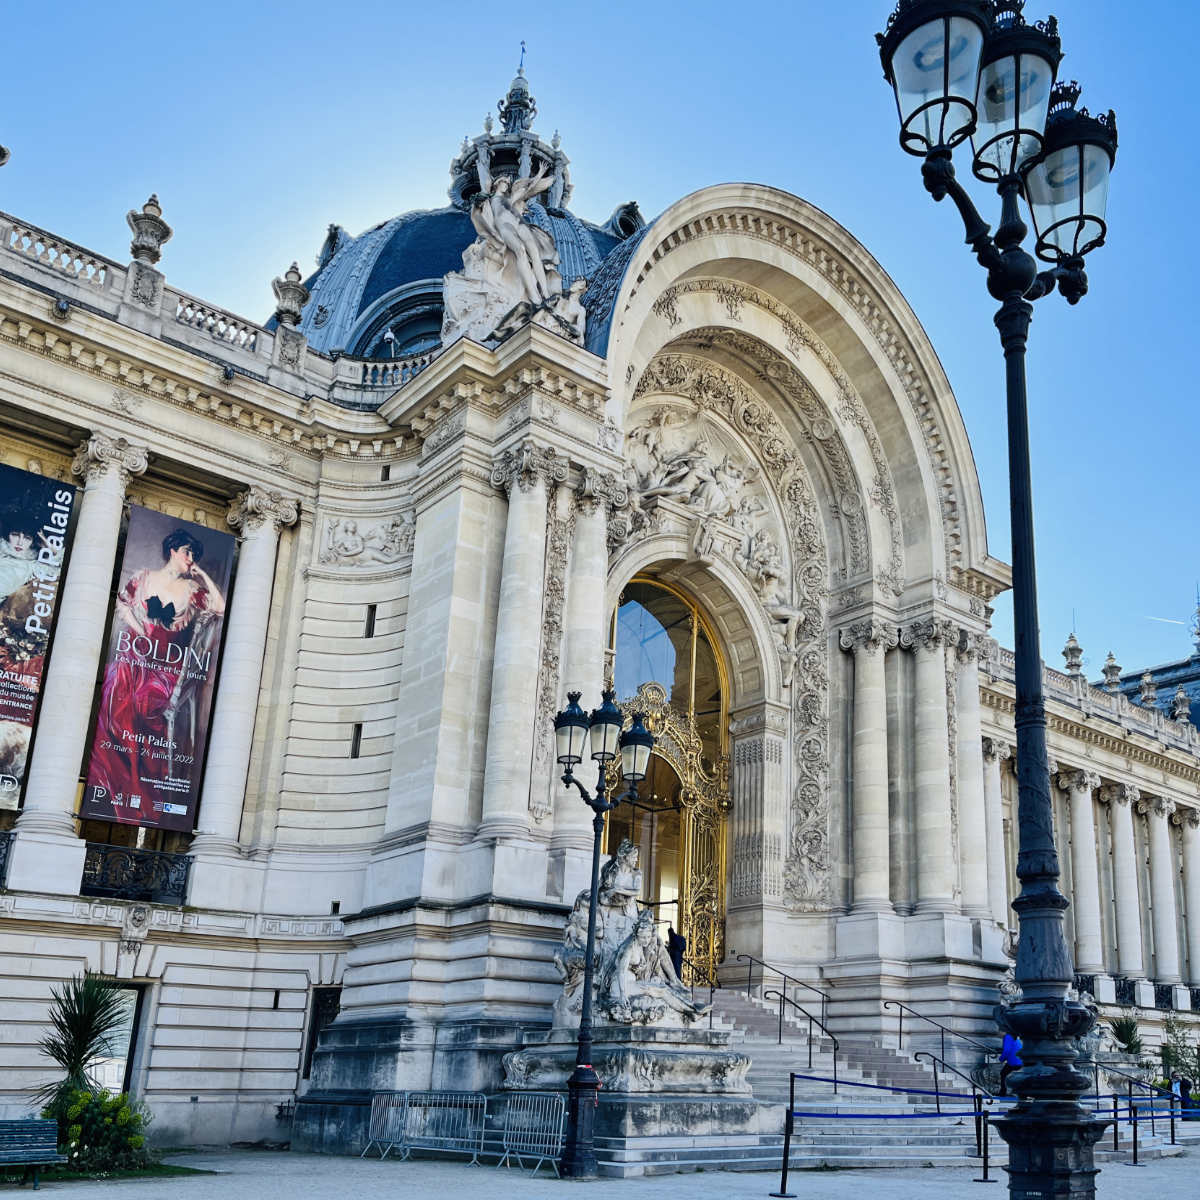 You are currently viewing Petit Palais in Paris: What to see inside